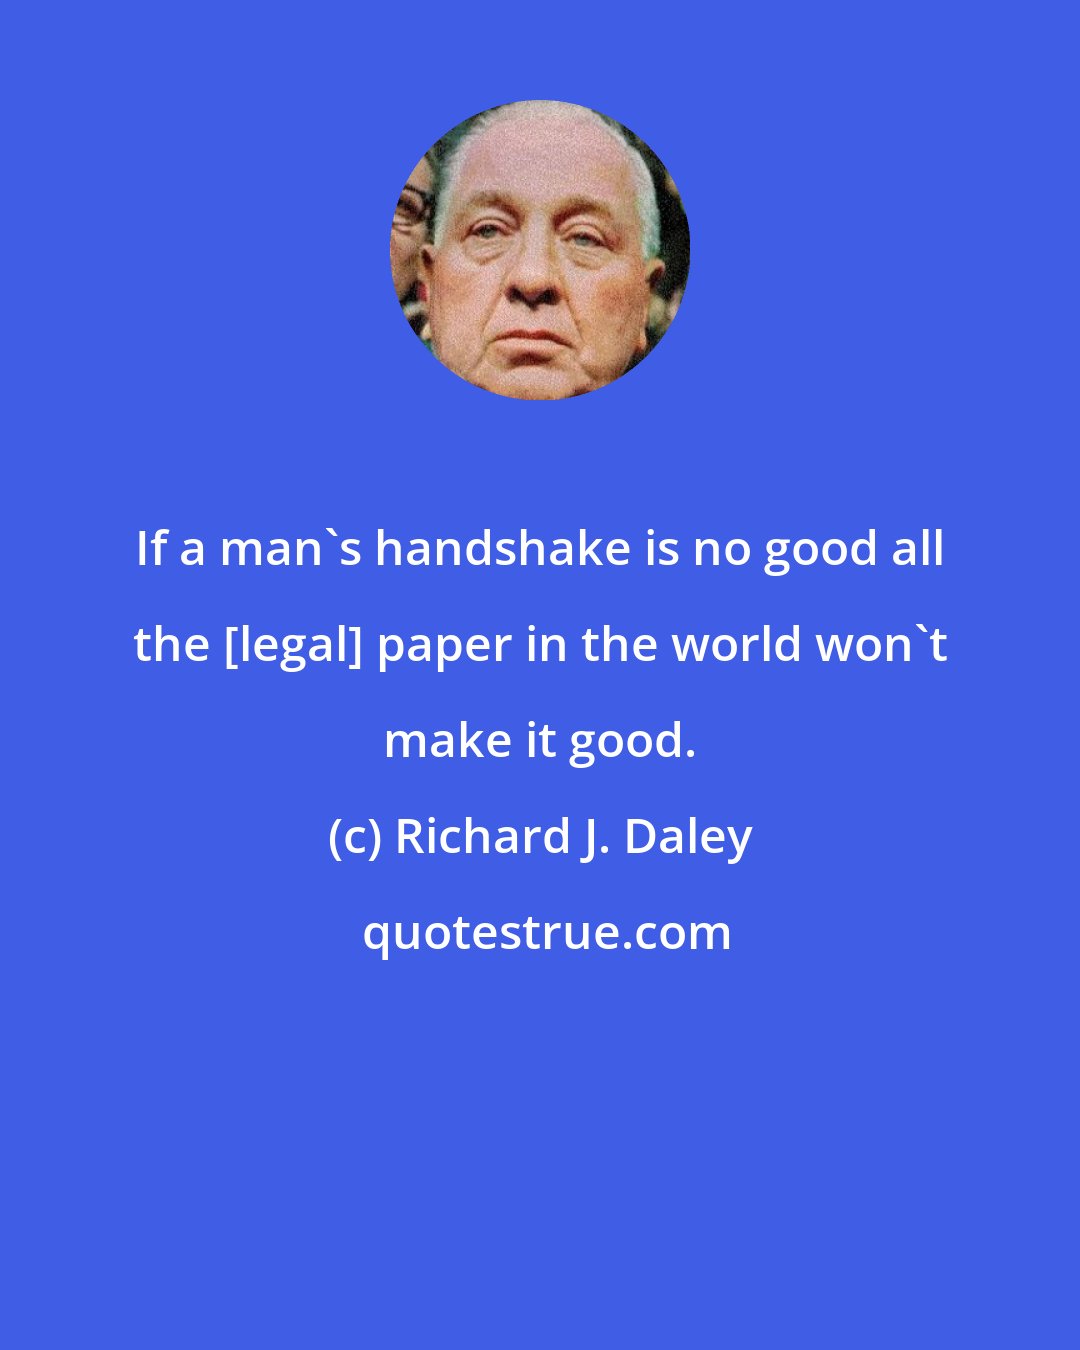 Richard J. Daley: If a man's handshake is no good all the {legal} paper in the world won't make it good.